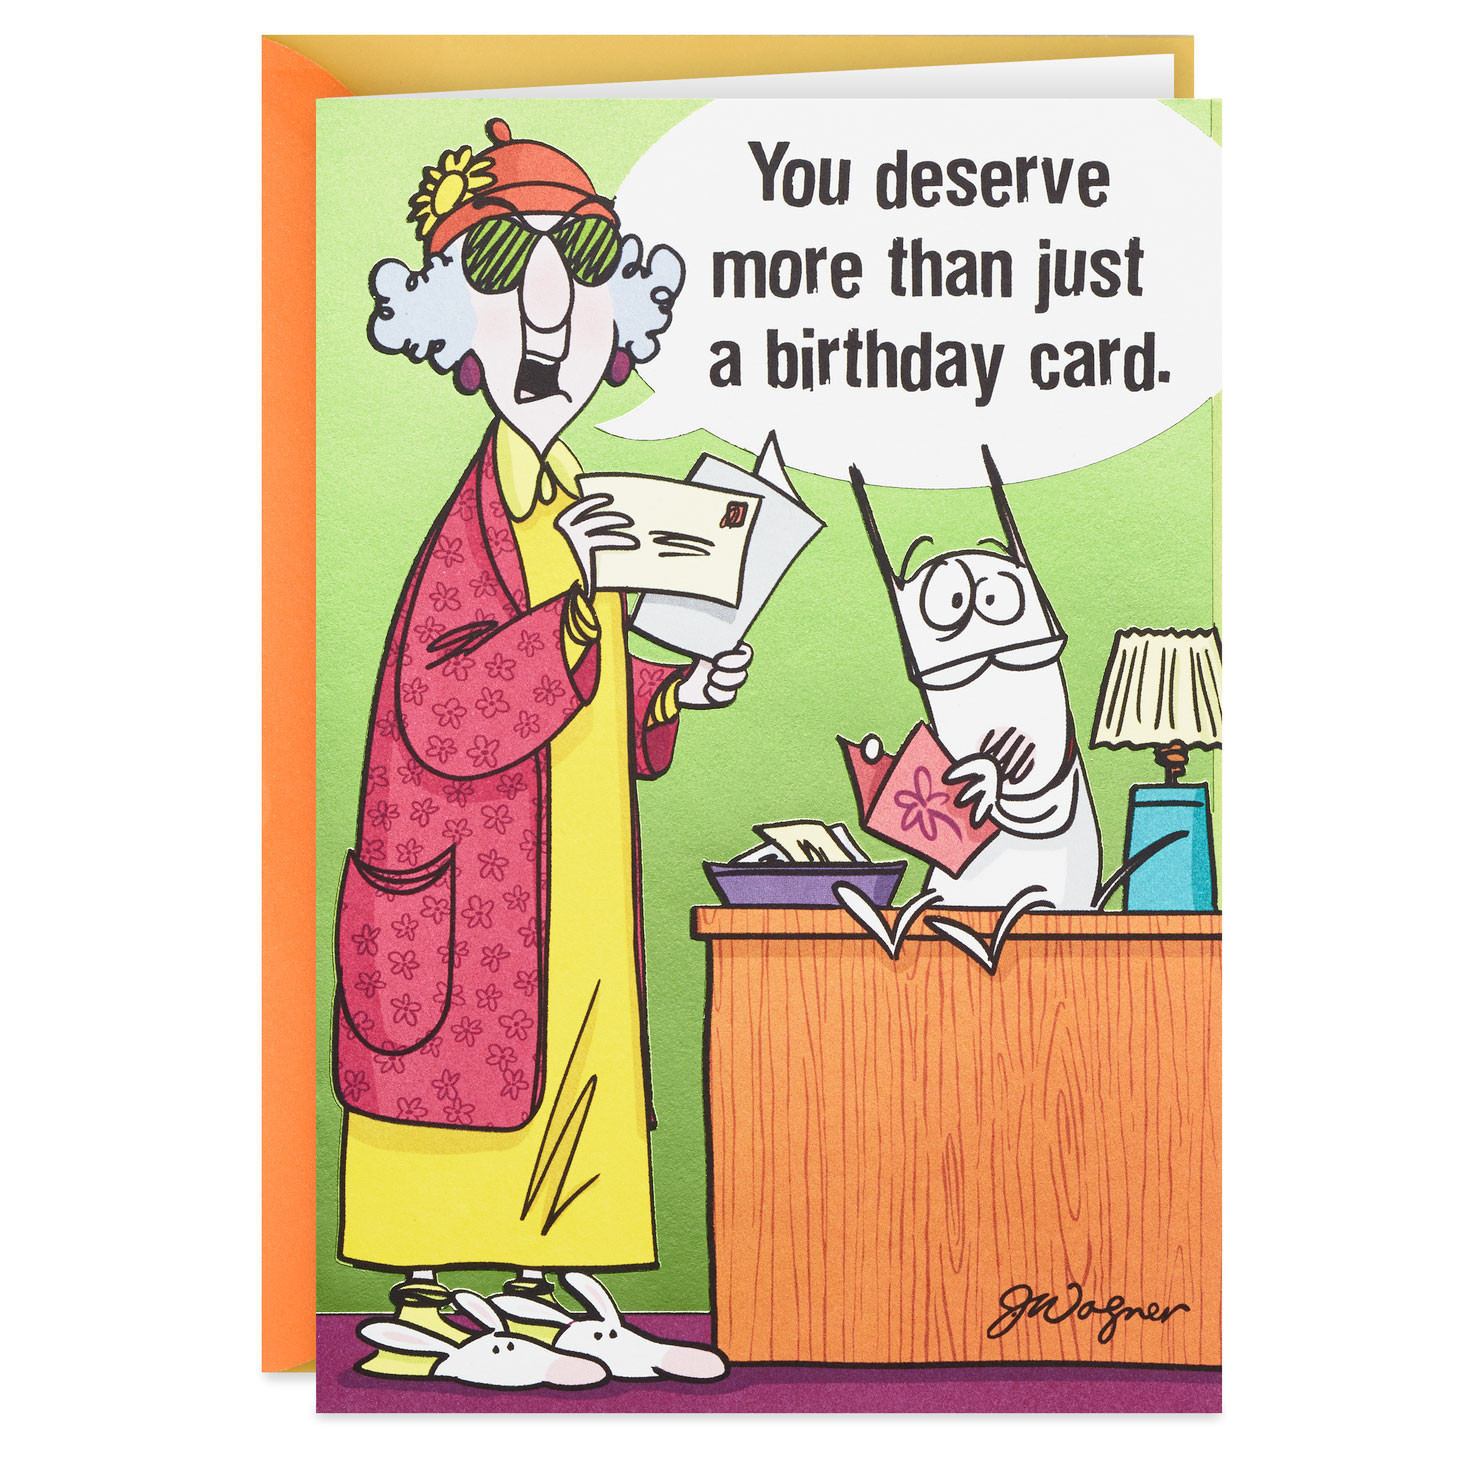 Funny Birthday Card Pictures
 Maxine™ You Deserve More Funny Birthday Card Greeting